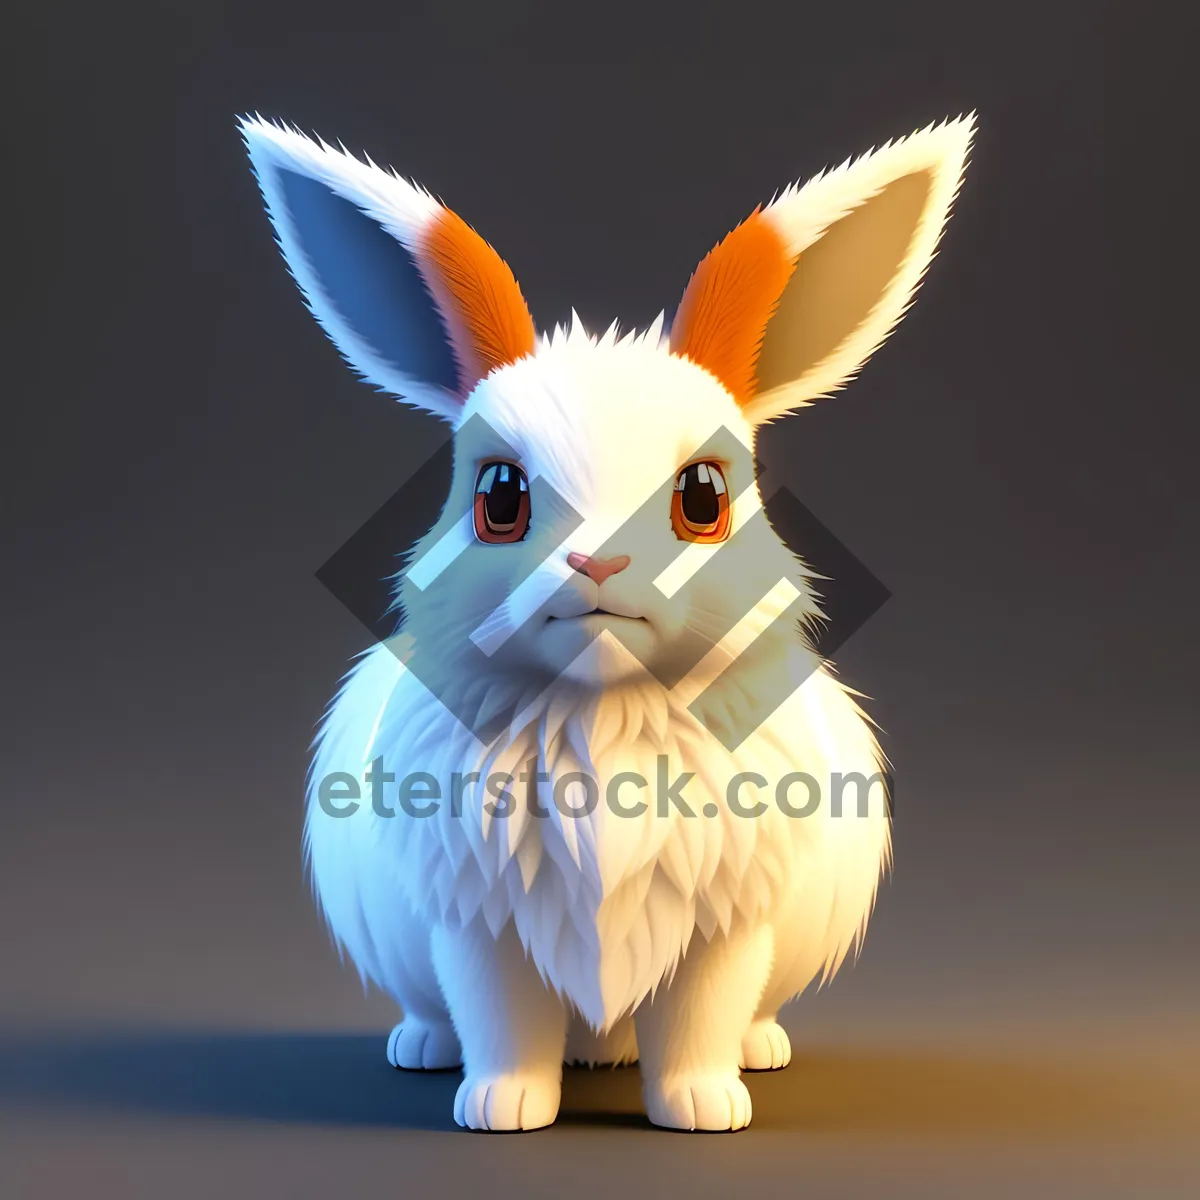 Picture of Cute Bunny with Fluffy Ears - Adorable Pet Portrait